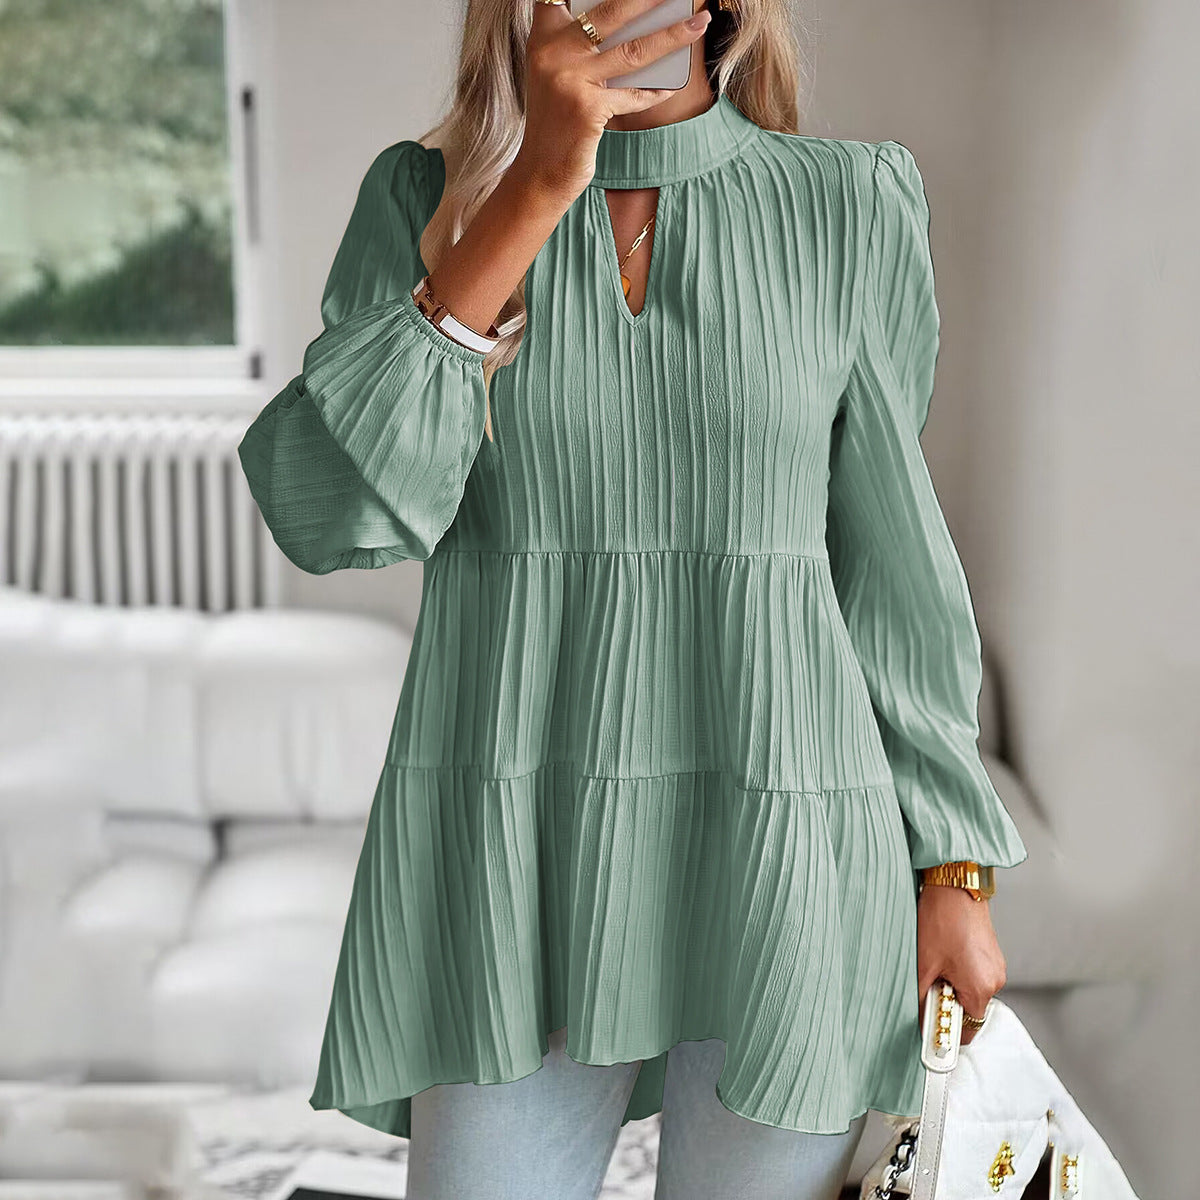 Shirt Women's Independent Stand Elegant Long-sleeved Top